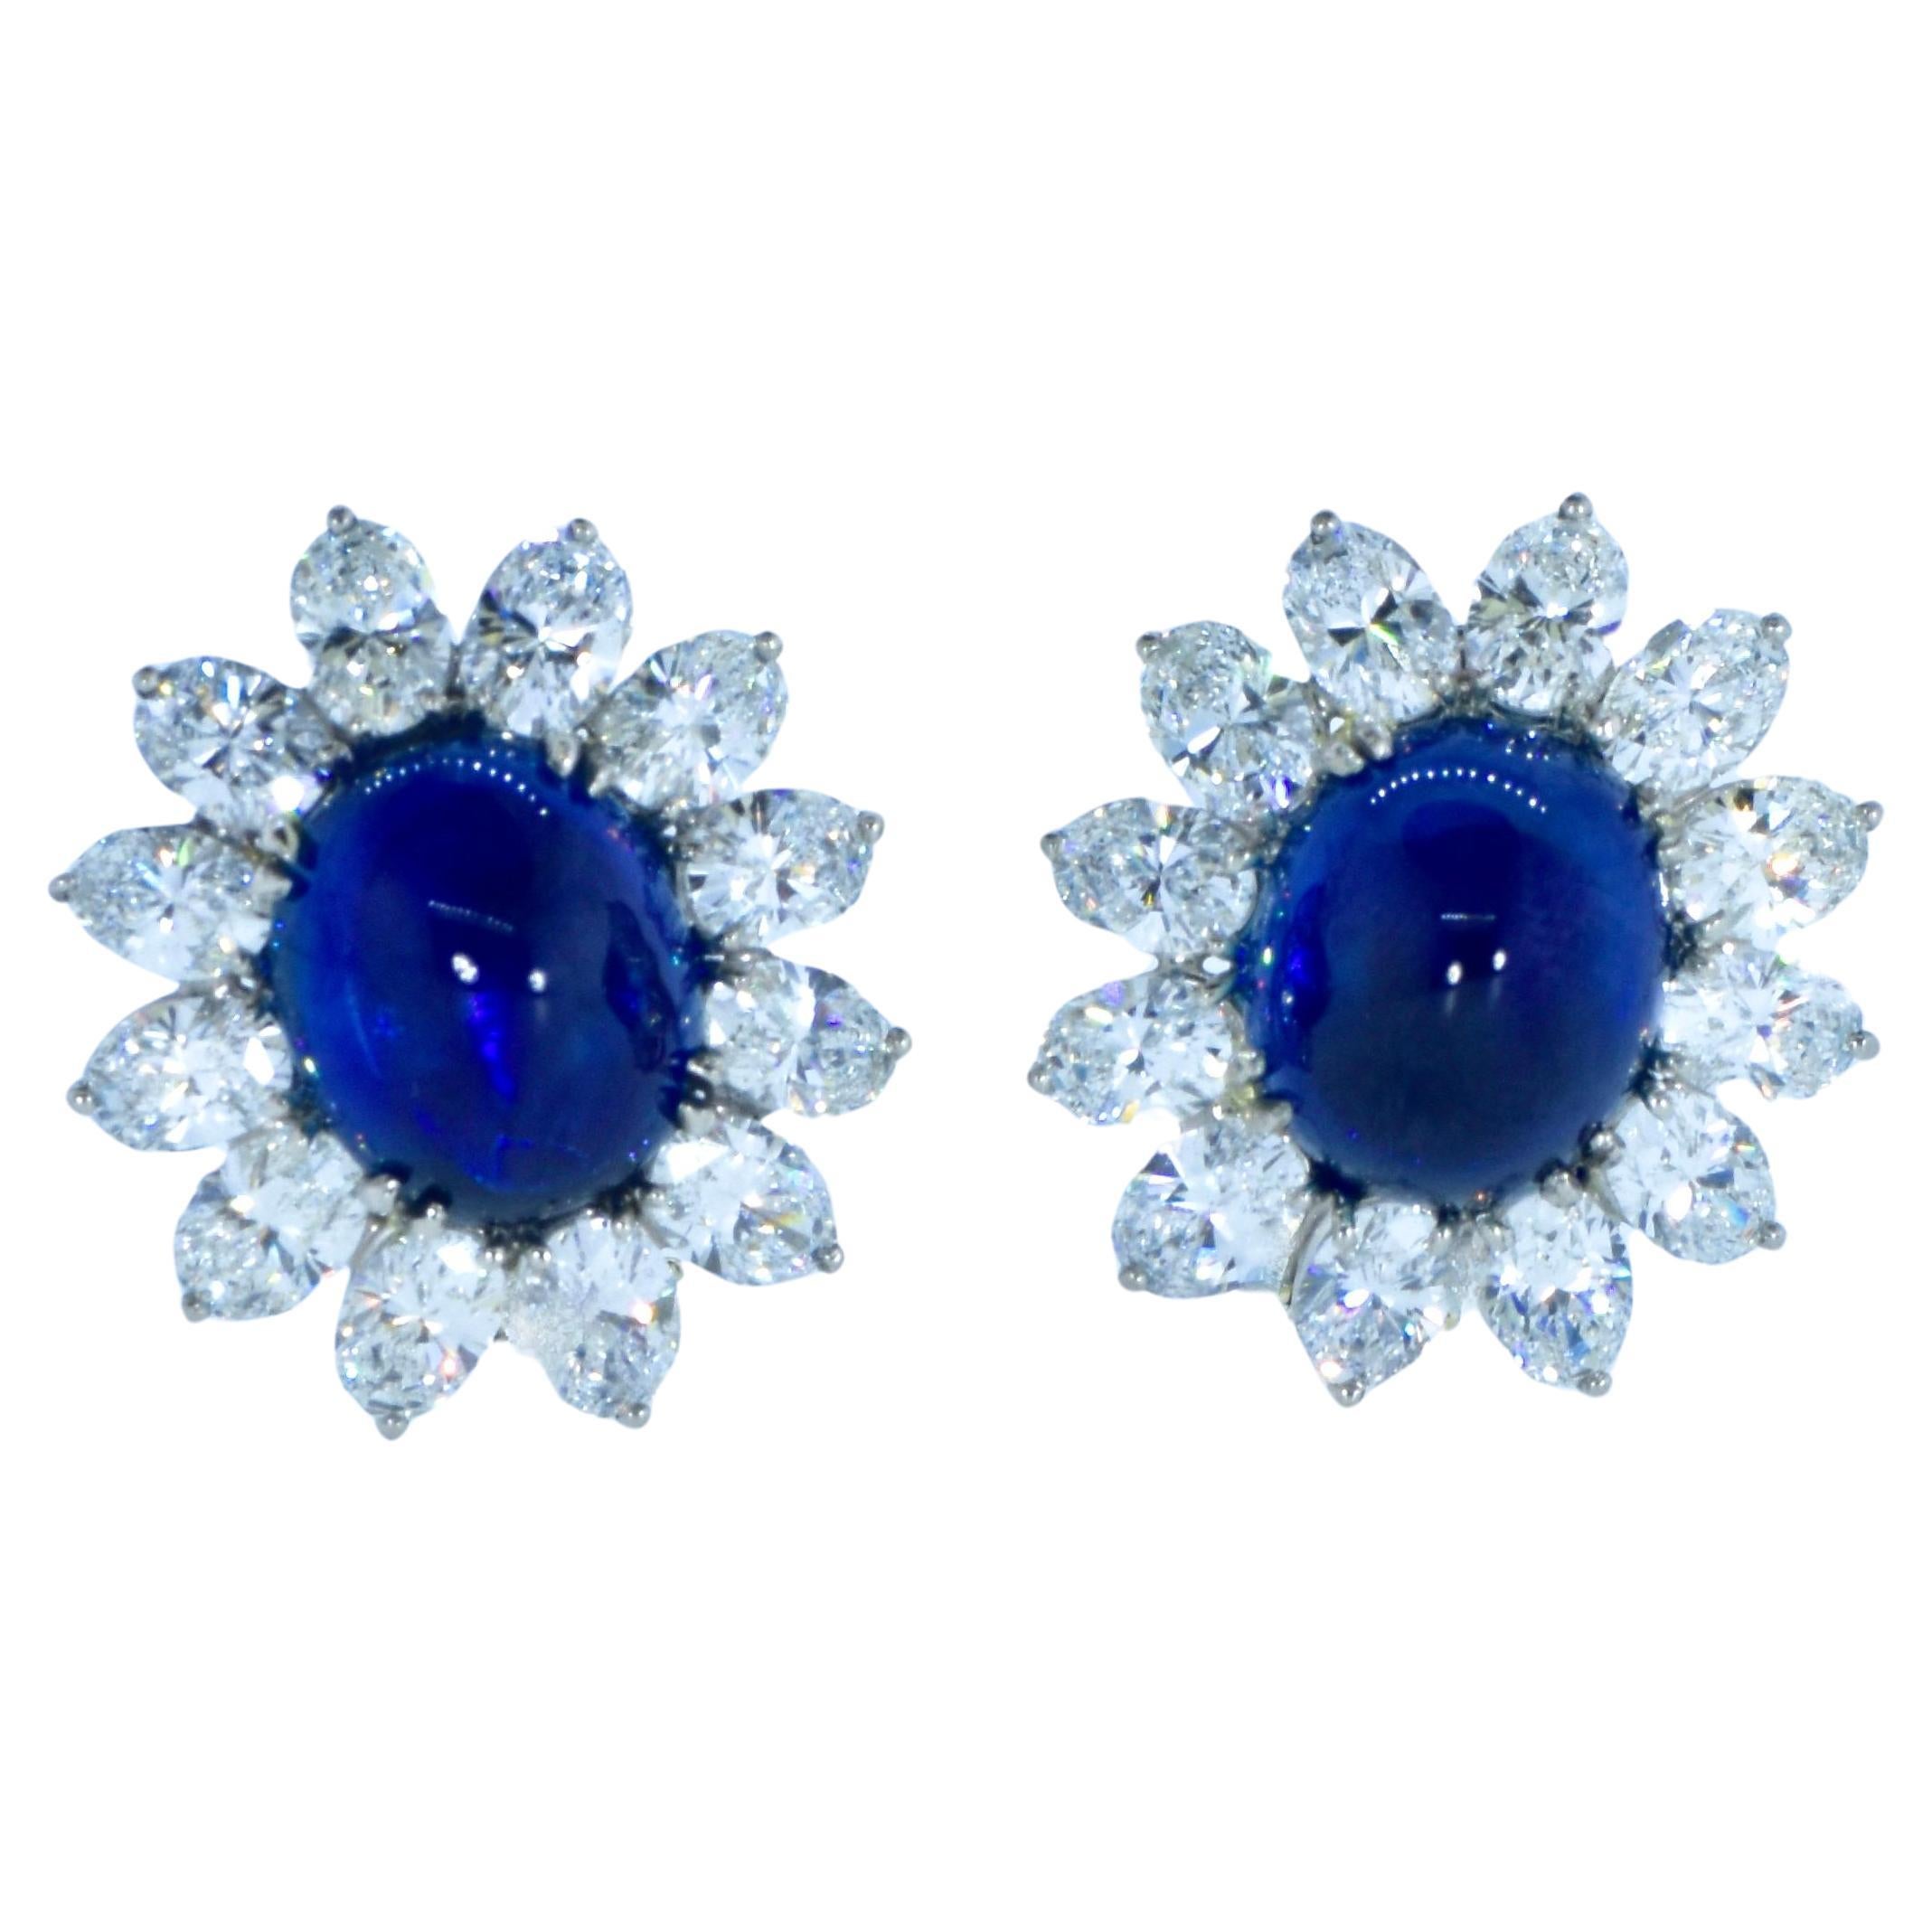 Certified Natural Sapphires, weighing 16.77cts & Fine Diamond Vintage Earrings For Sale